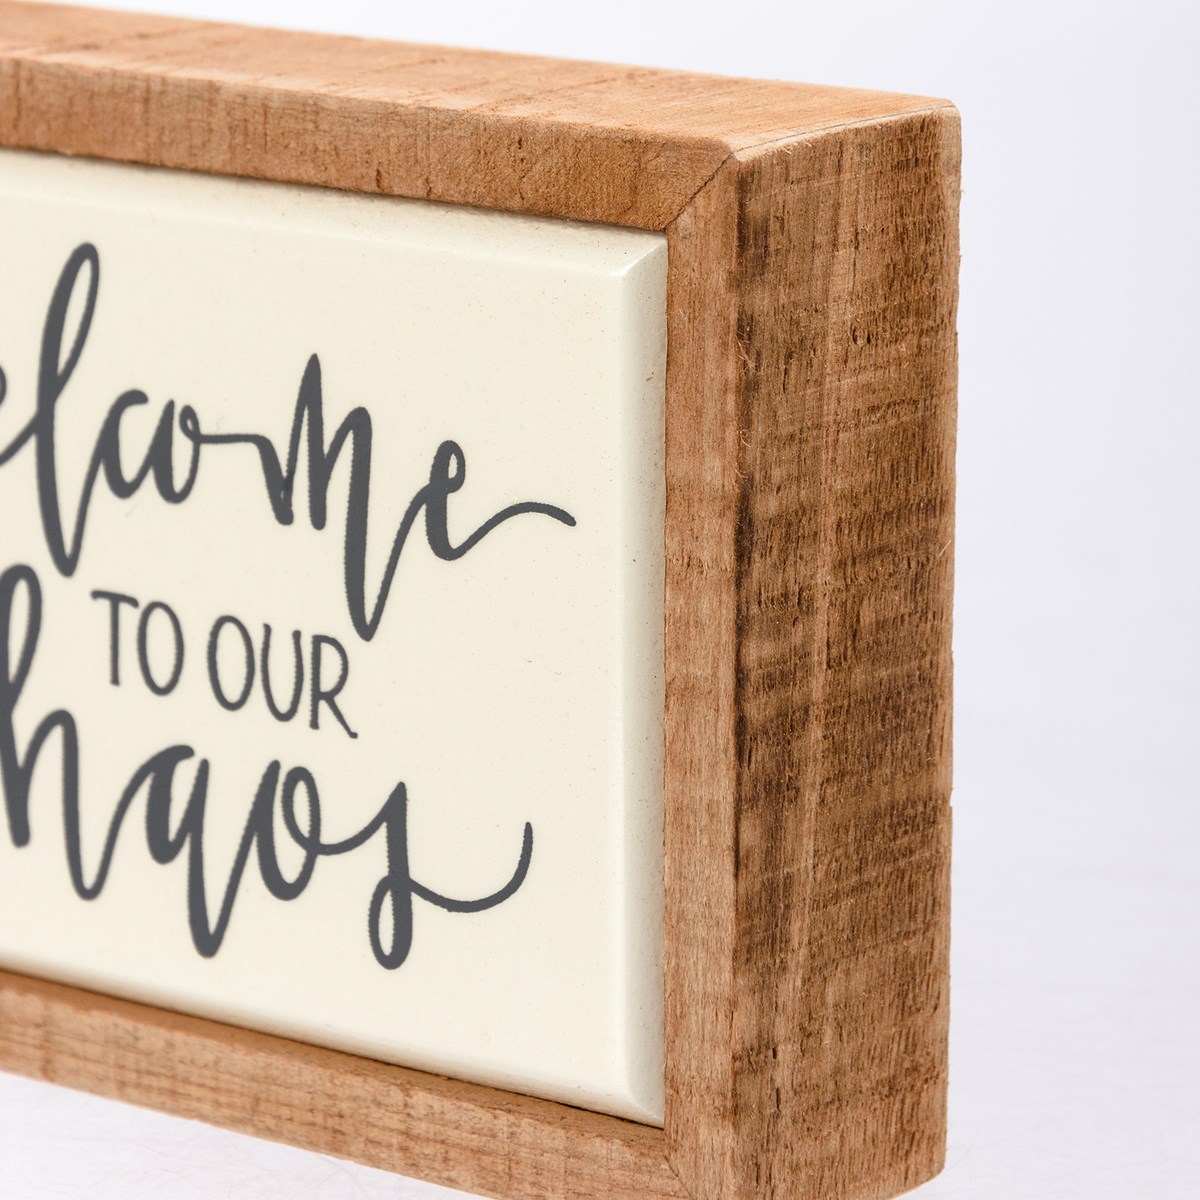 Welcome To Our Chaos Box Sign Mini - Wood